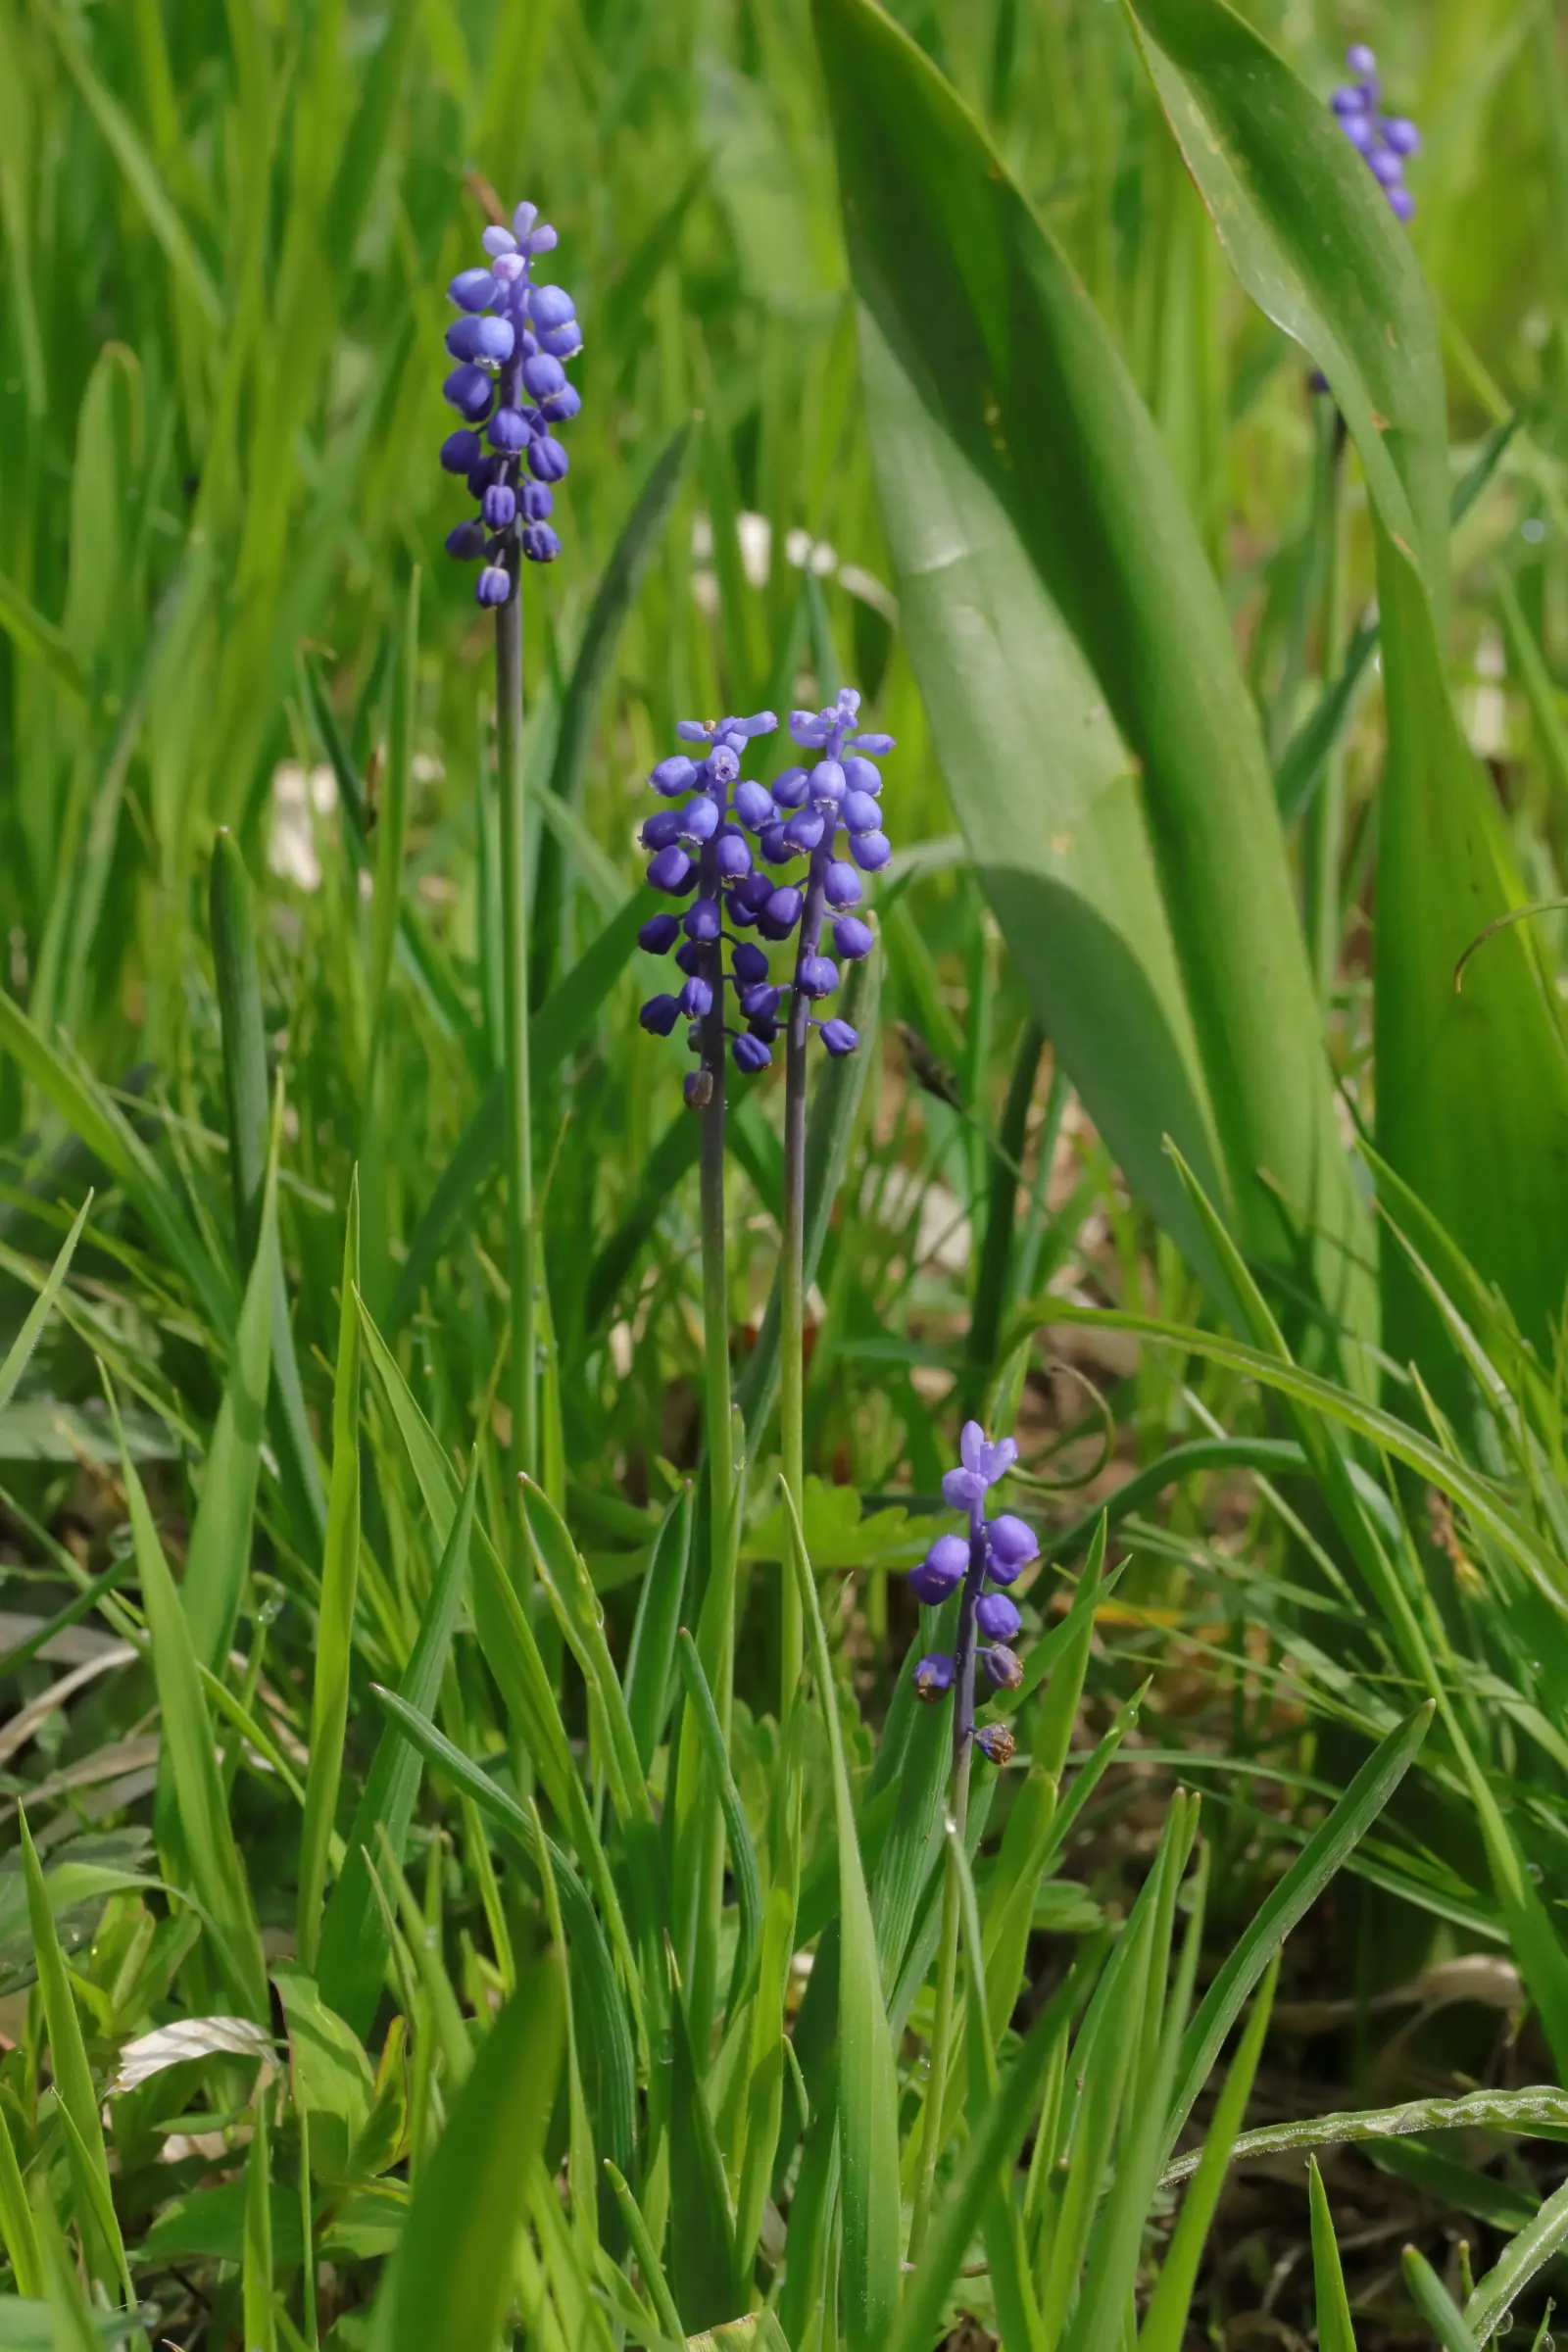 Small grape hyacinth - dark blue inflorescence on a green stem. In the background are leaves of autumn crocus.